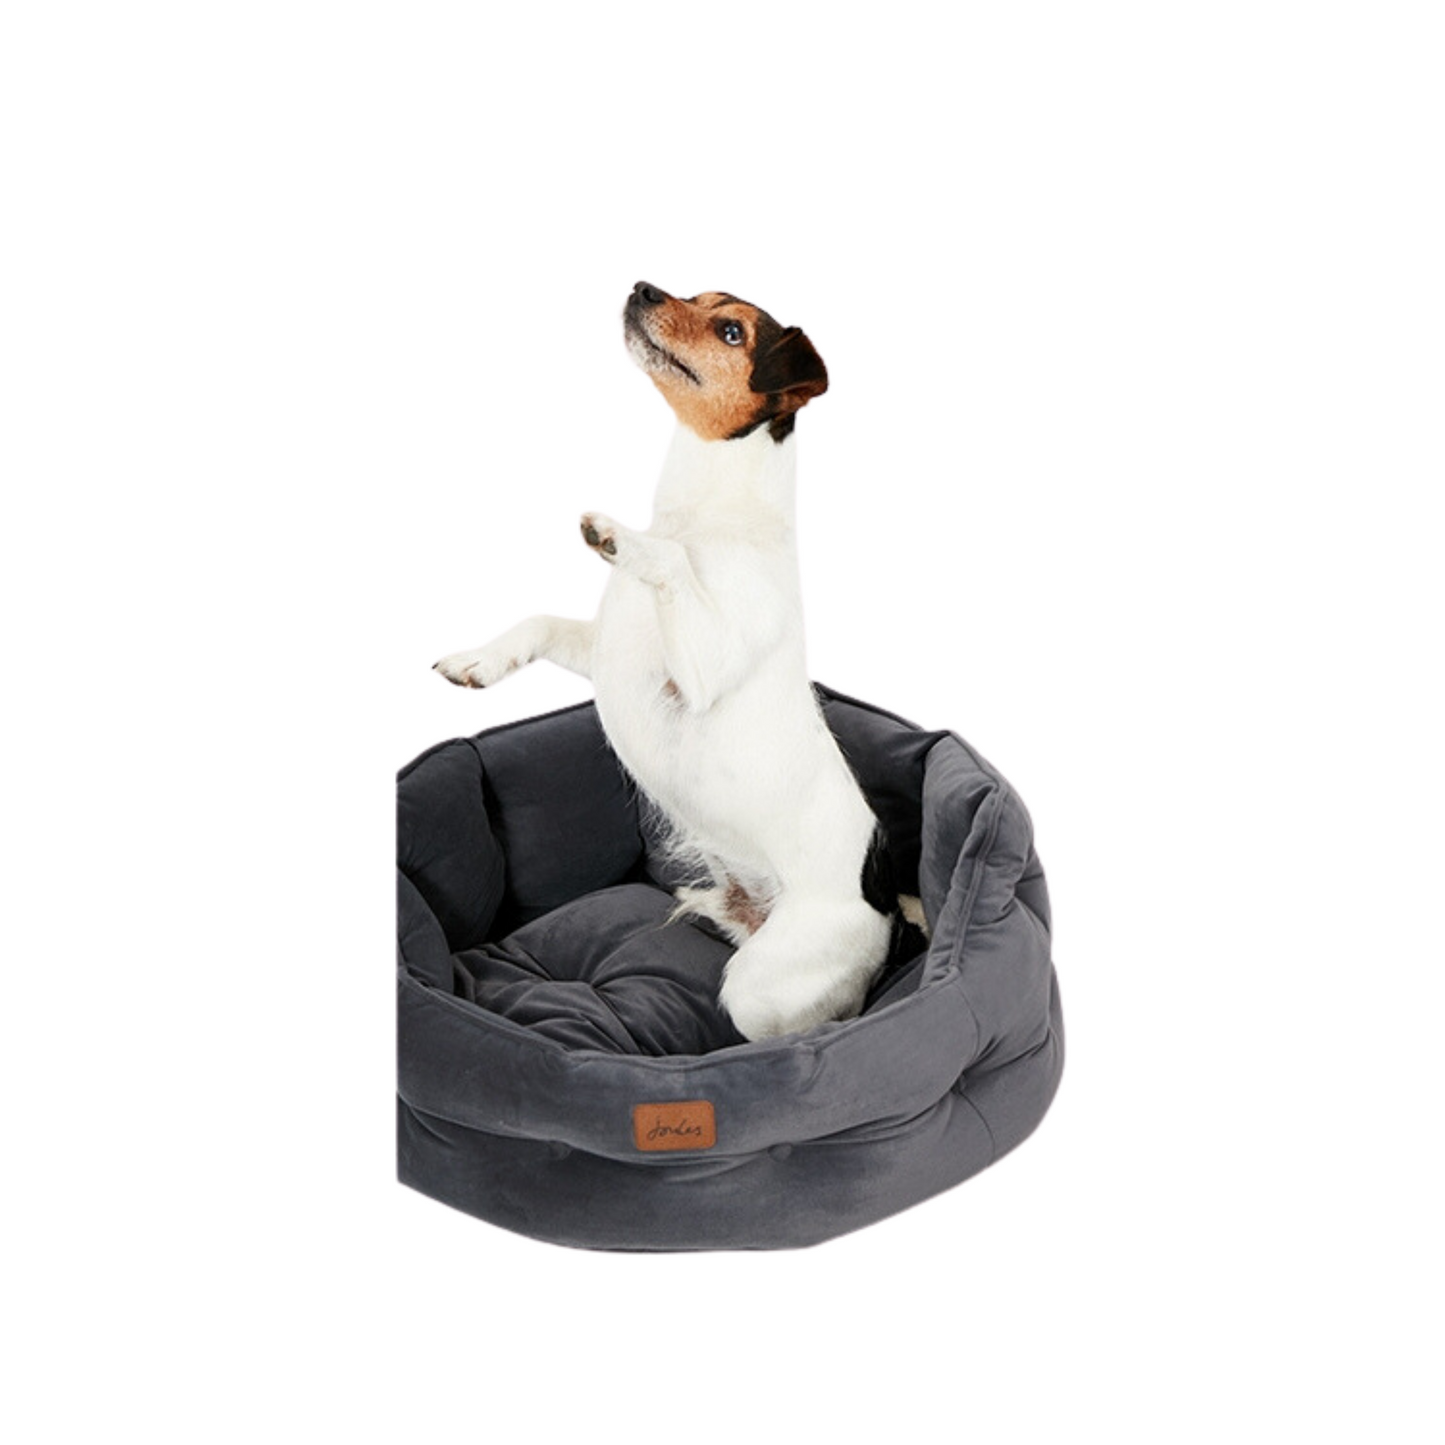 JOULES-CHESTERFIELD PET BED GREY SMALL